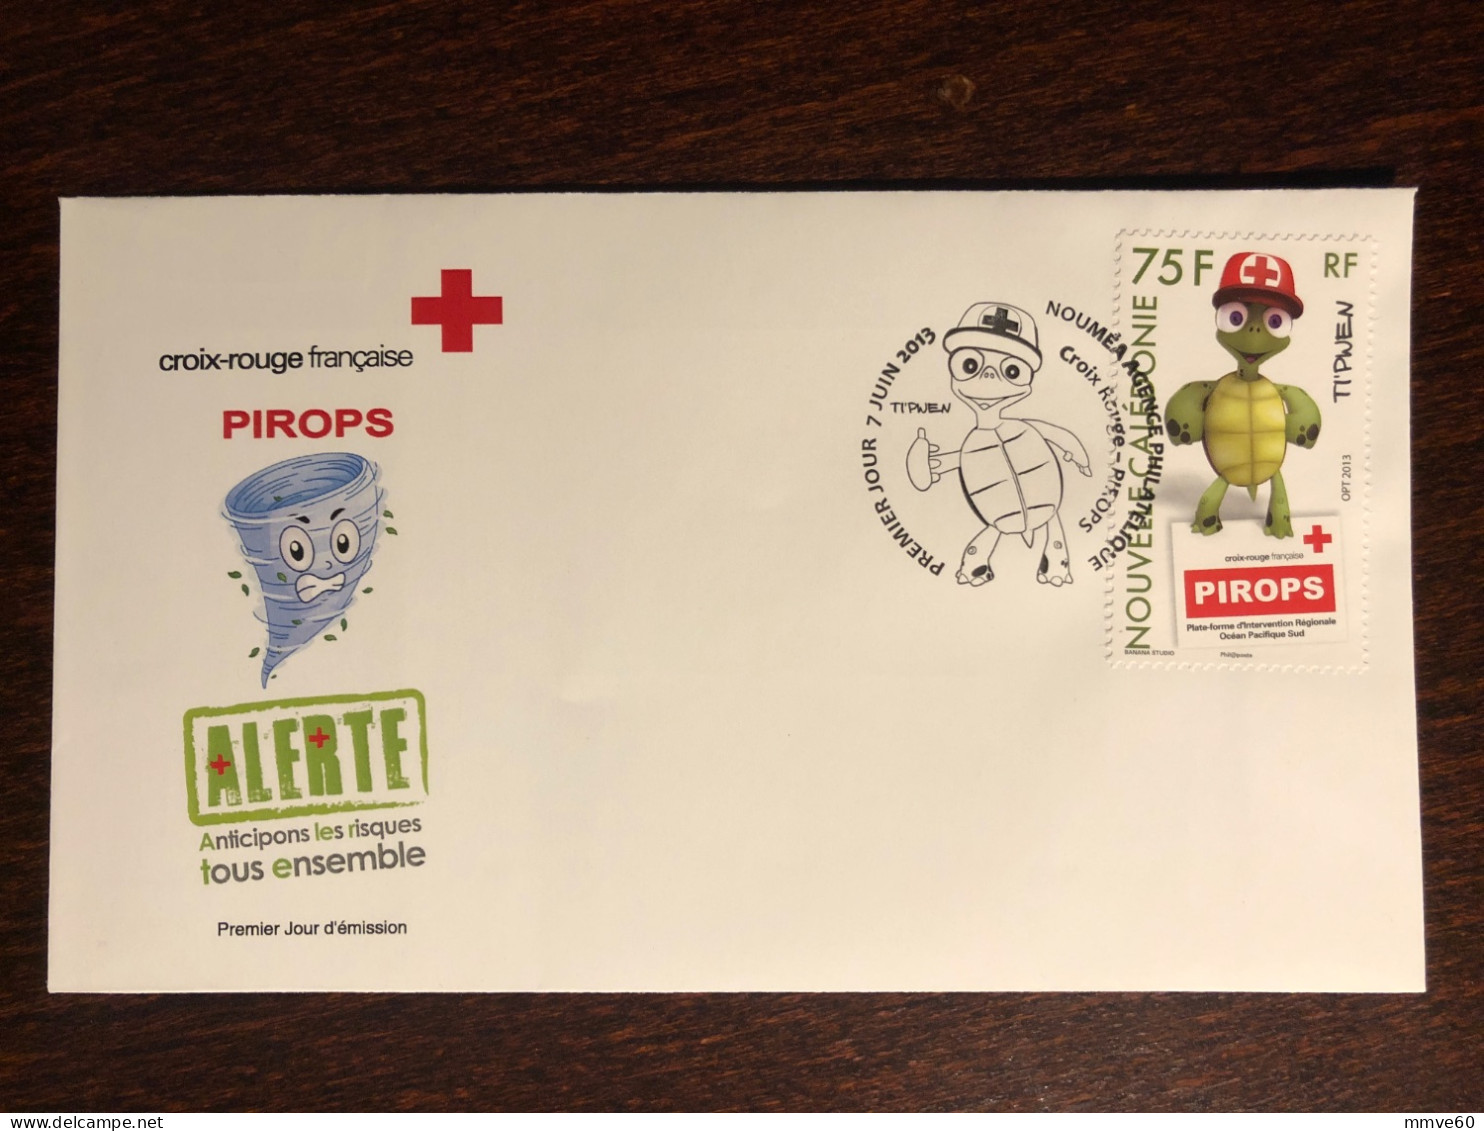 NEW CALEDONIA NOUVELLE CALEDONIE FDC COVER 2013 YEAR RED CROSS CROIX ROUGE HEALTH MEDICINE - Lettres & Documents